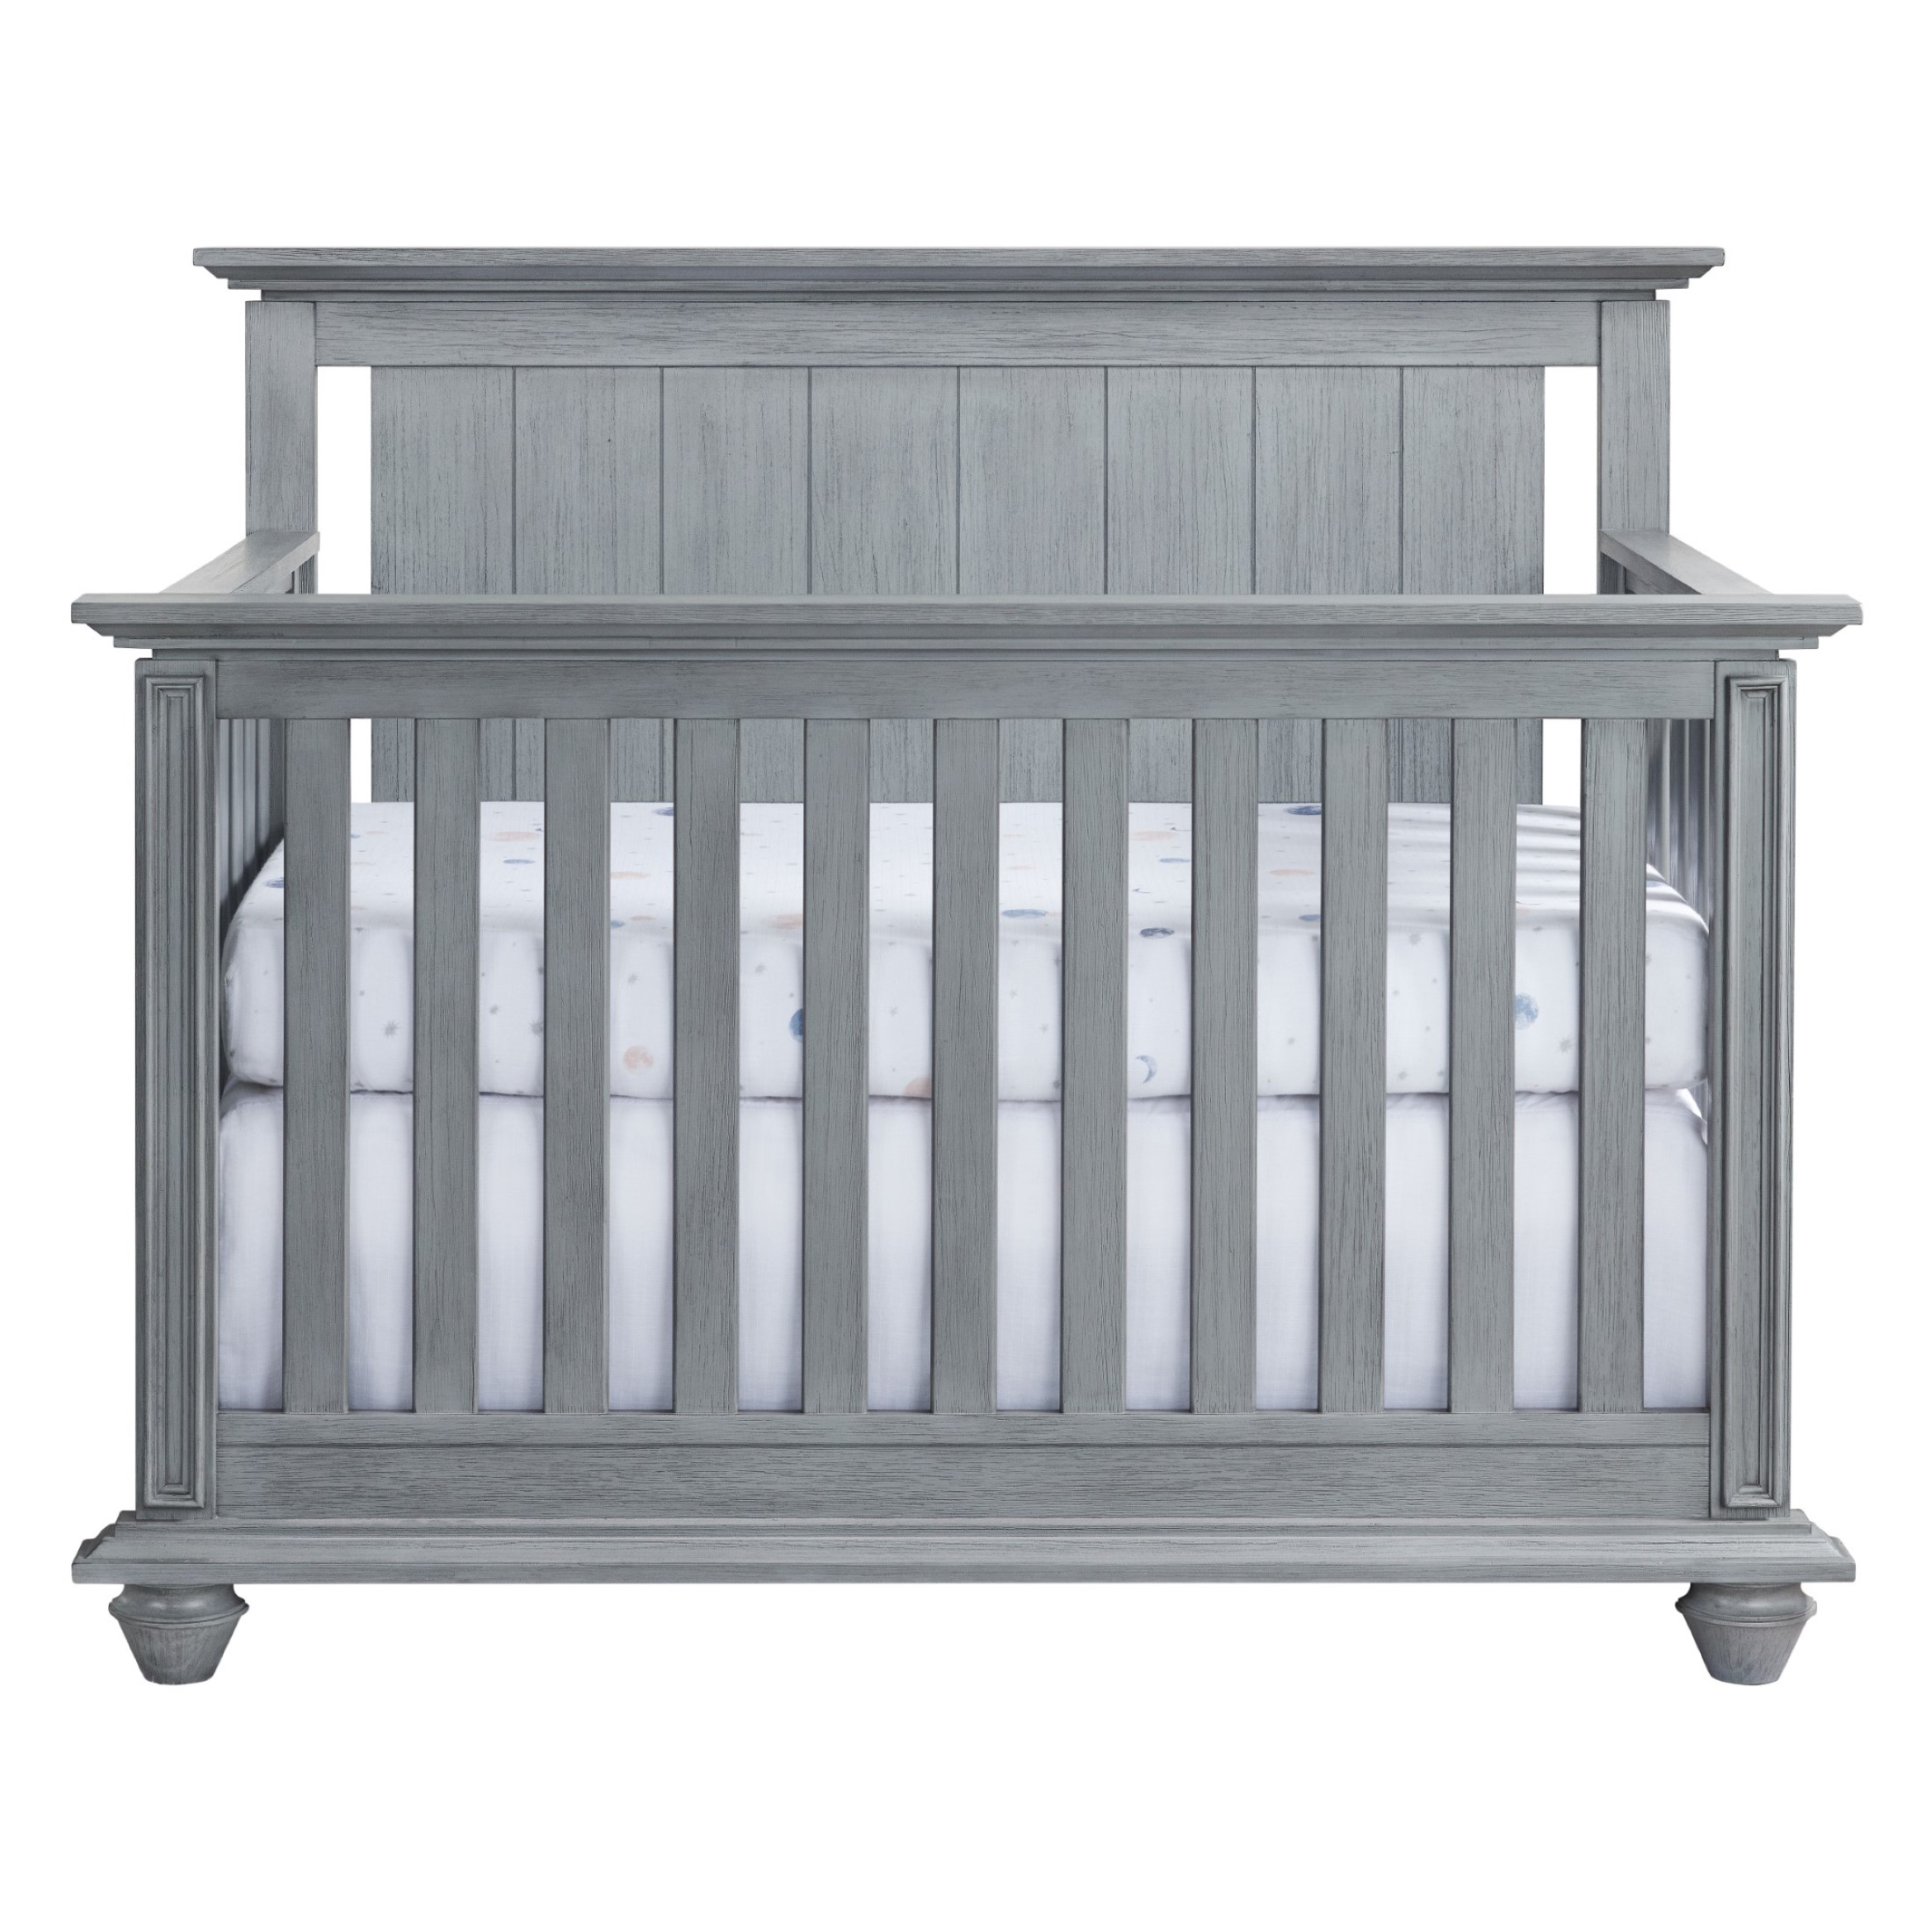 Oxford Baby Langston 4-in-1 Convertible Crib, Graphite Gray, Wooden Crib - image 4 of 11